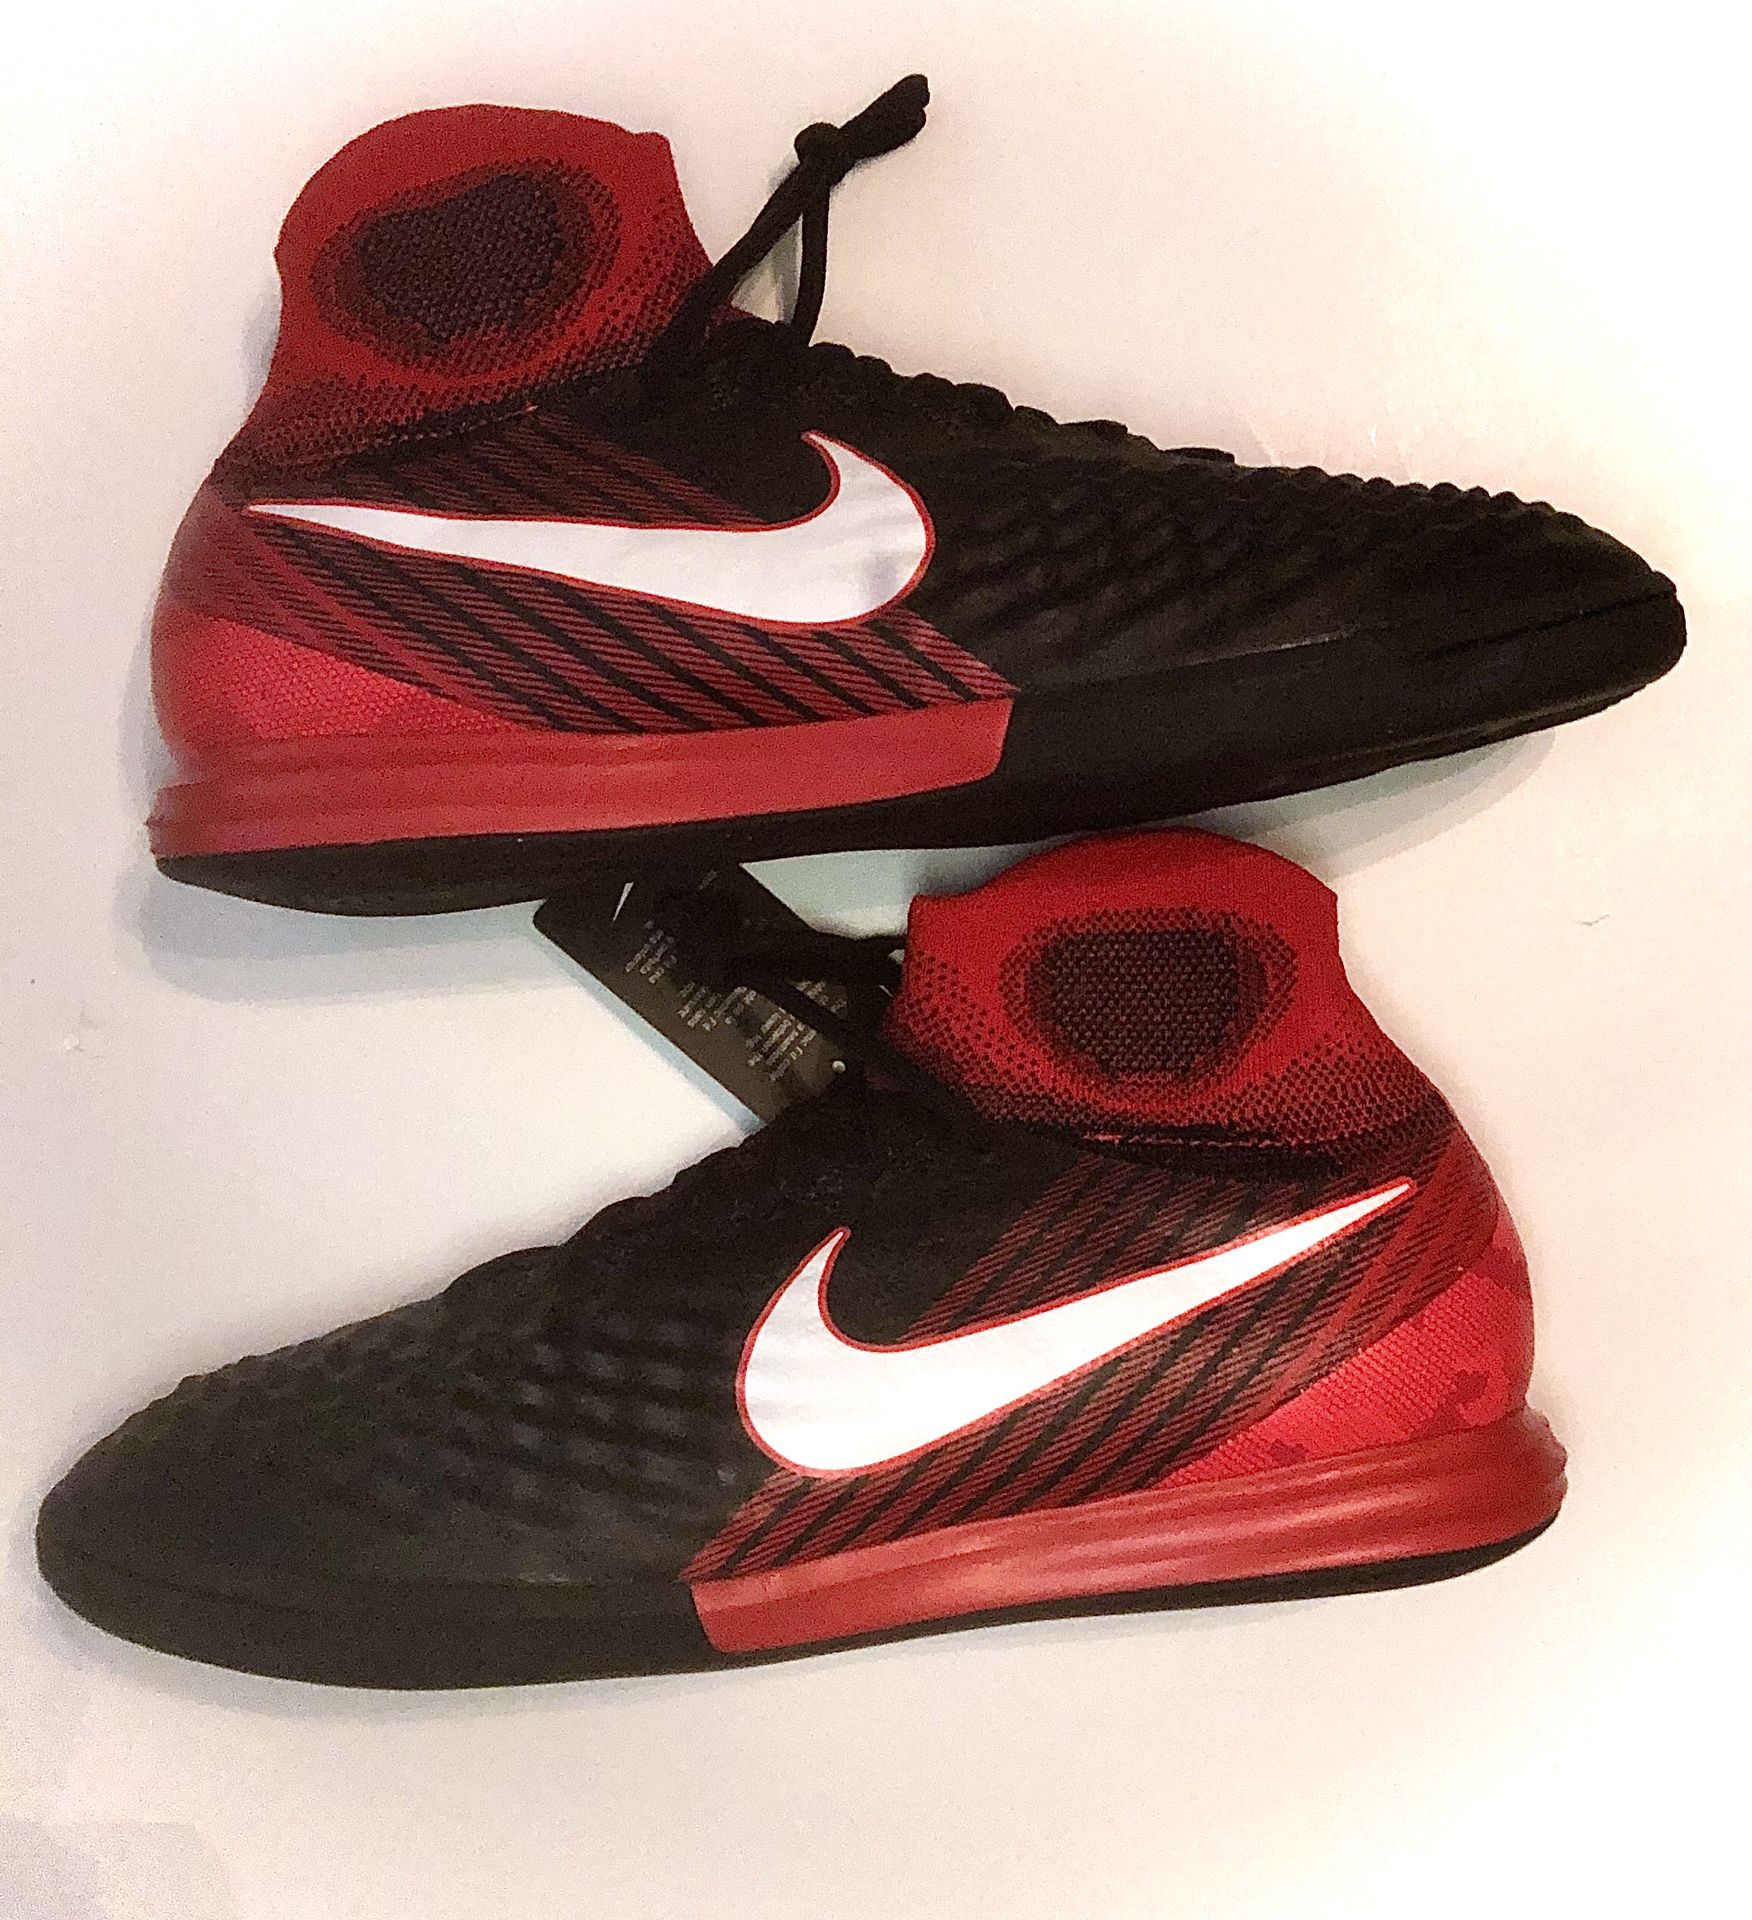 Mens Nike MagistaX Proximo II IC DF Indoor Soccer 843957 061 Size 11